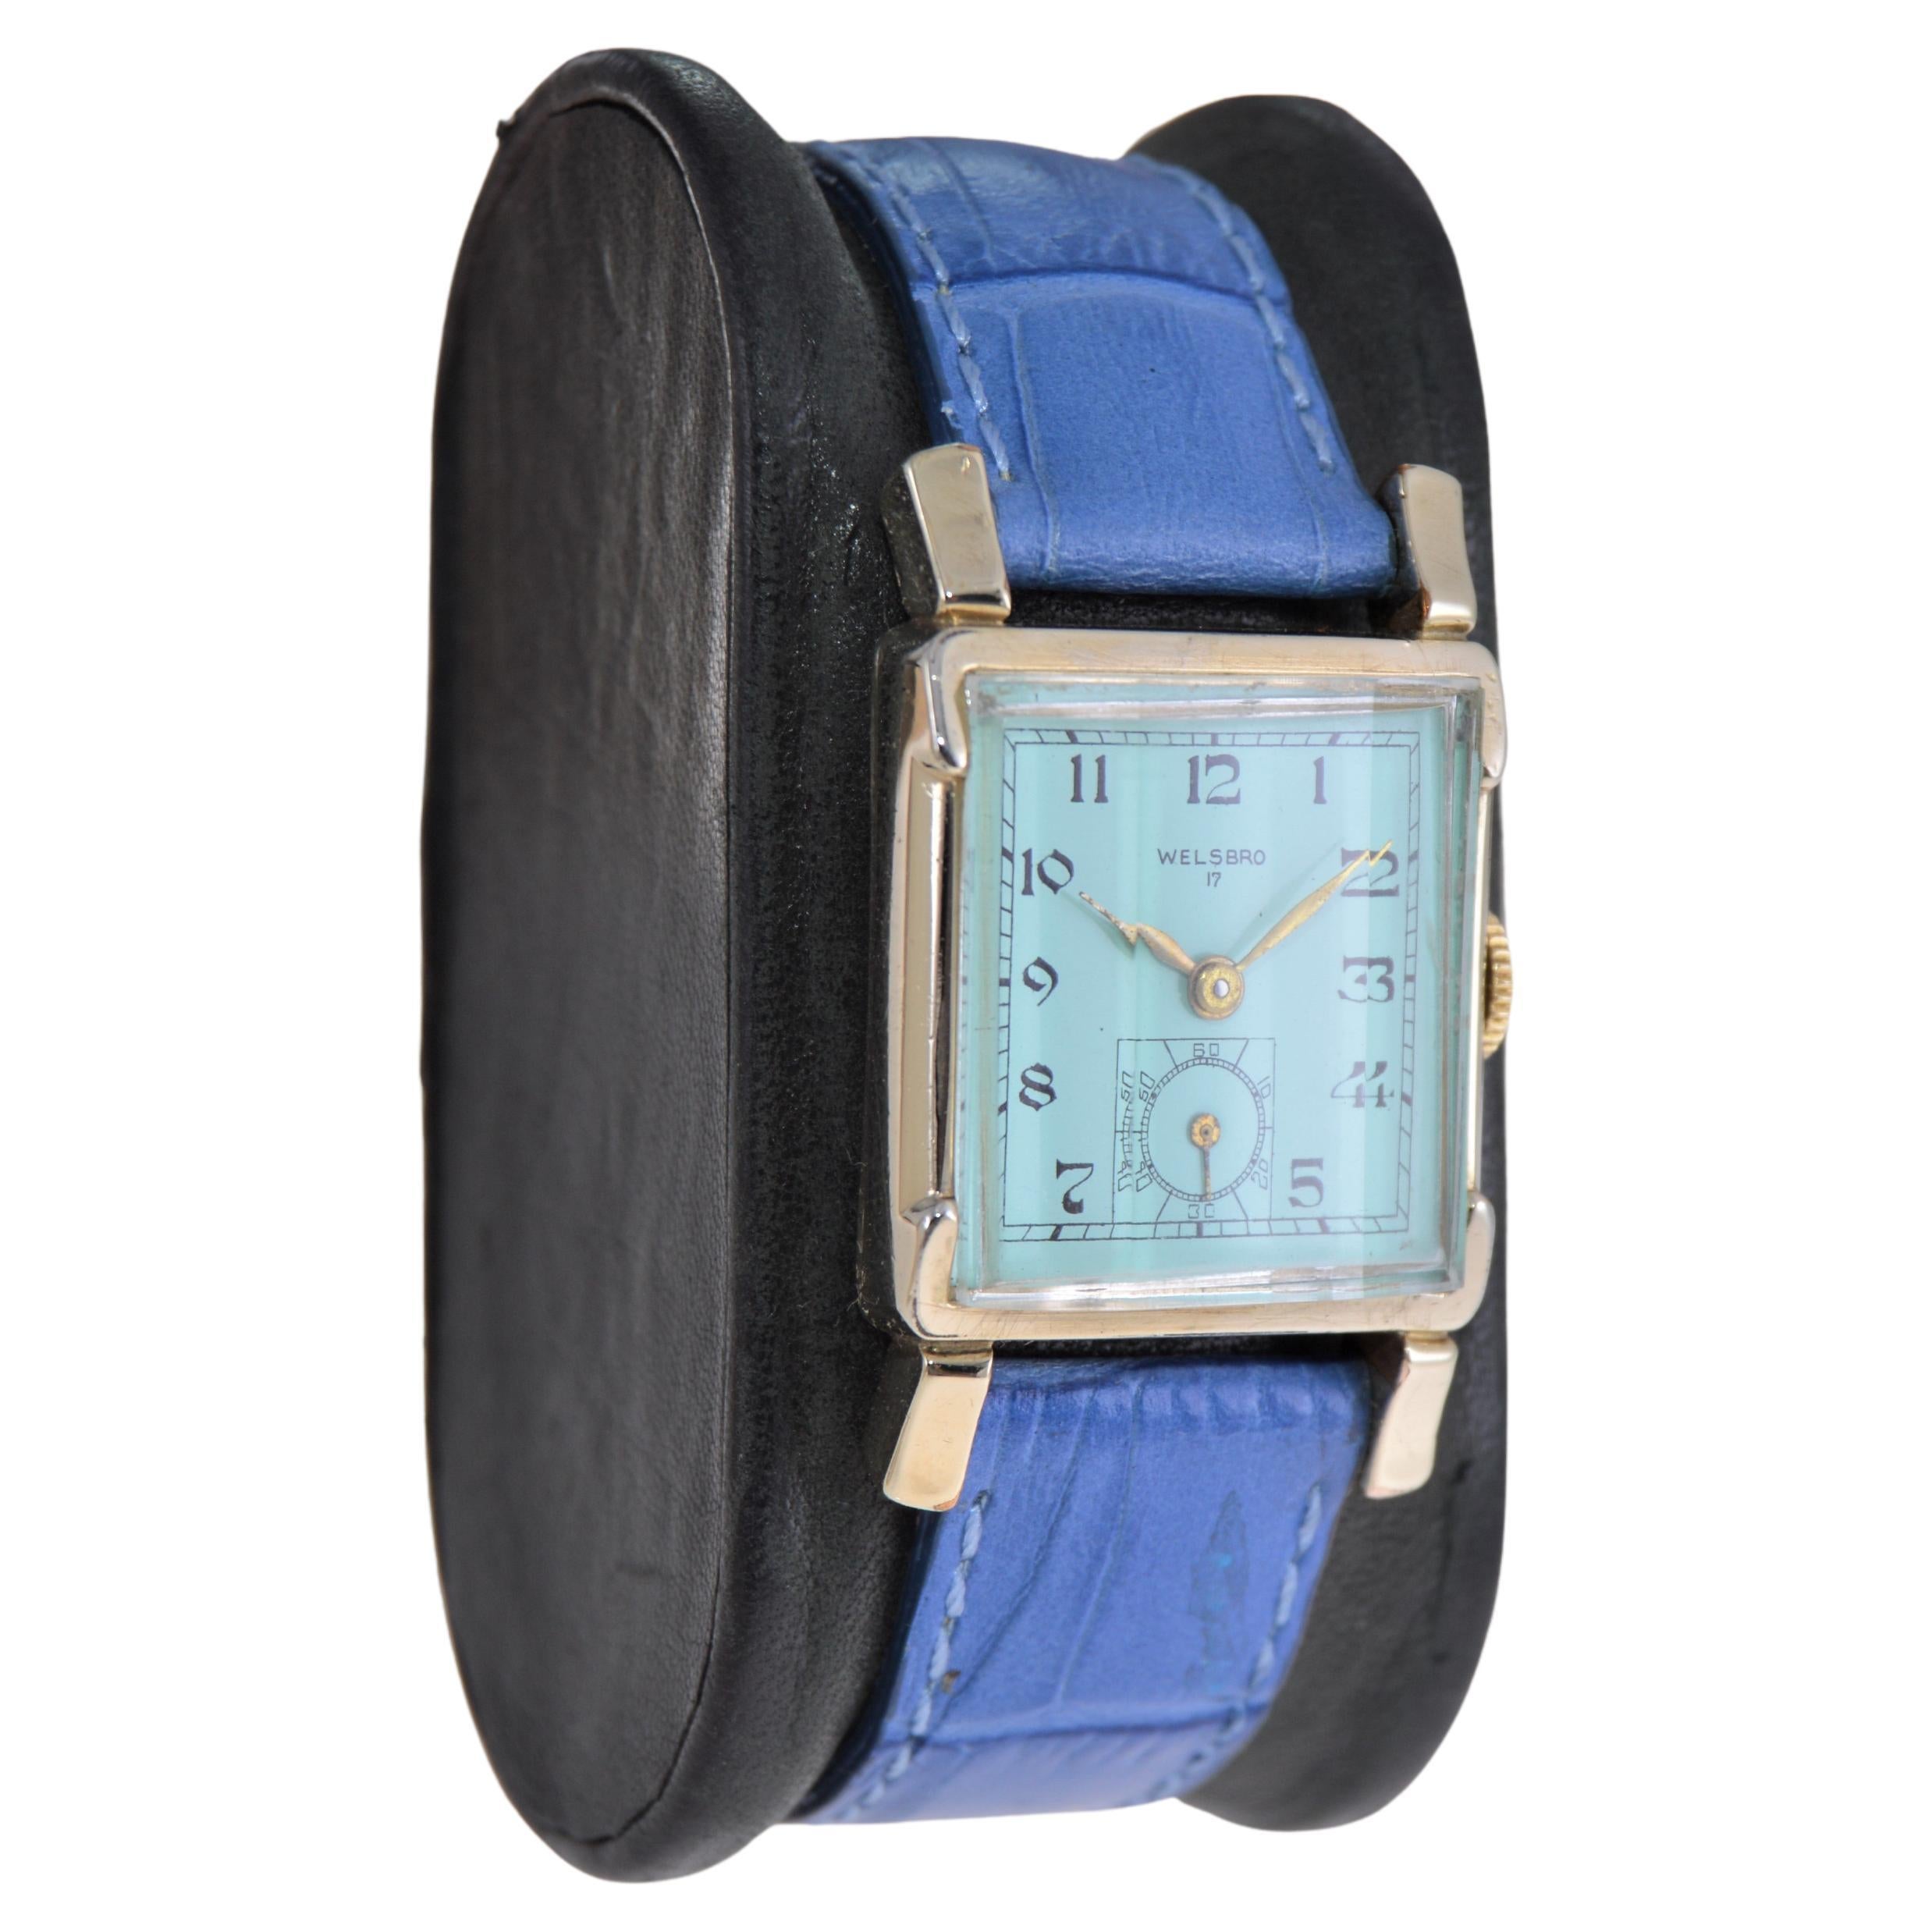 FACTORY / HOUSE: Welbros Watch Company
STYLE / REFERENCE: Art Deco / Reference 
METAL / MATERIAL: Yellow Gold Filled
CIRCA / YEAR: 1940's
DIMENSIONS / SIZE: 38mm Length X 28mm Diameter
MOVEMENT / CALIBER: Manual Winding / 17 Jewels / Caliber